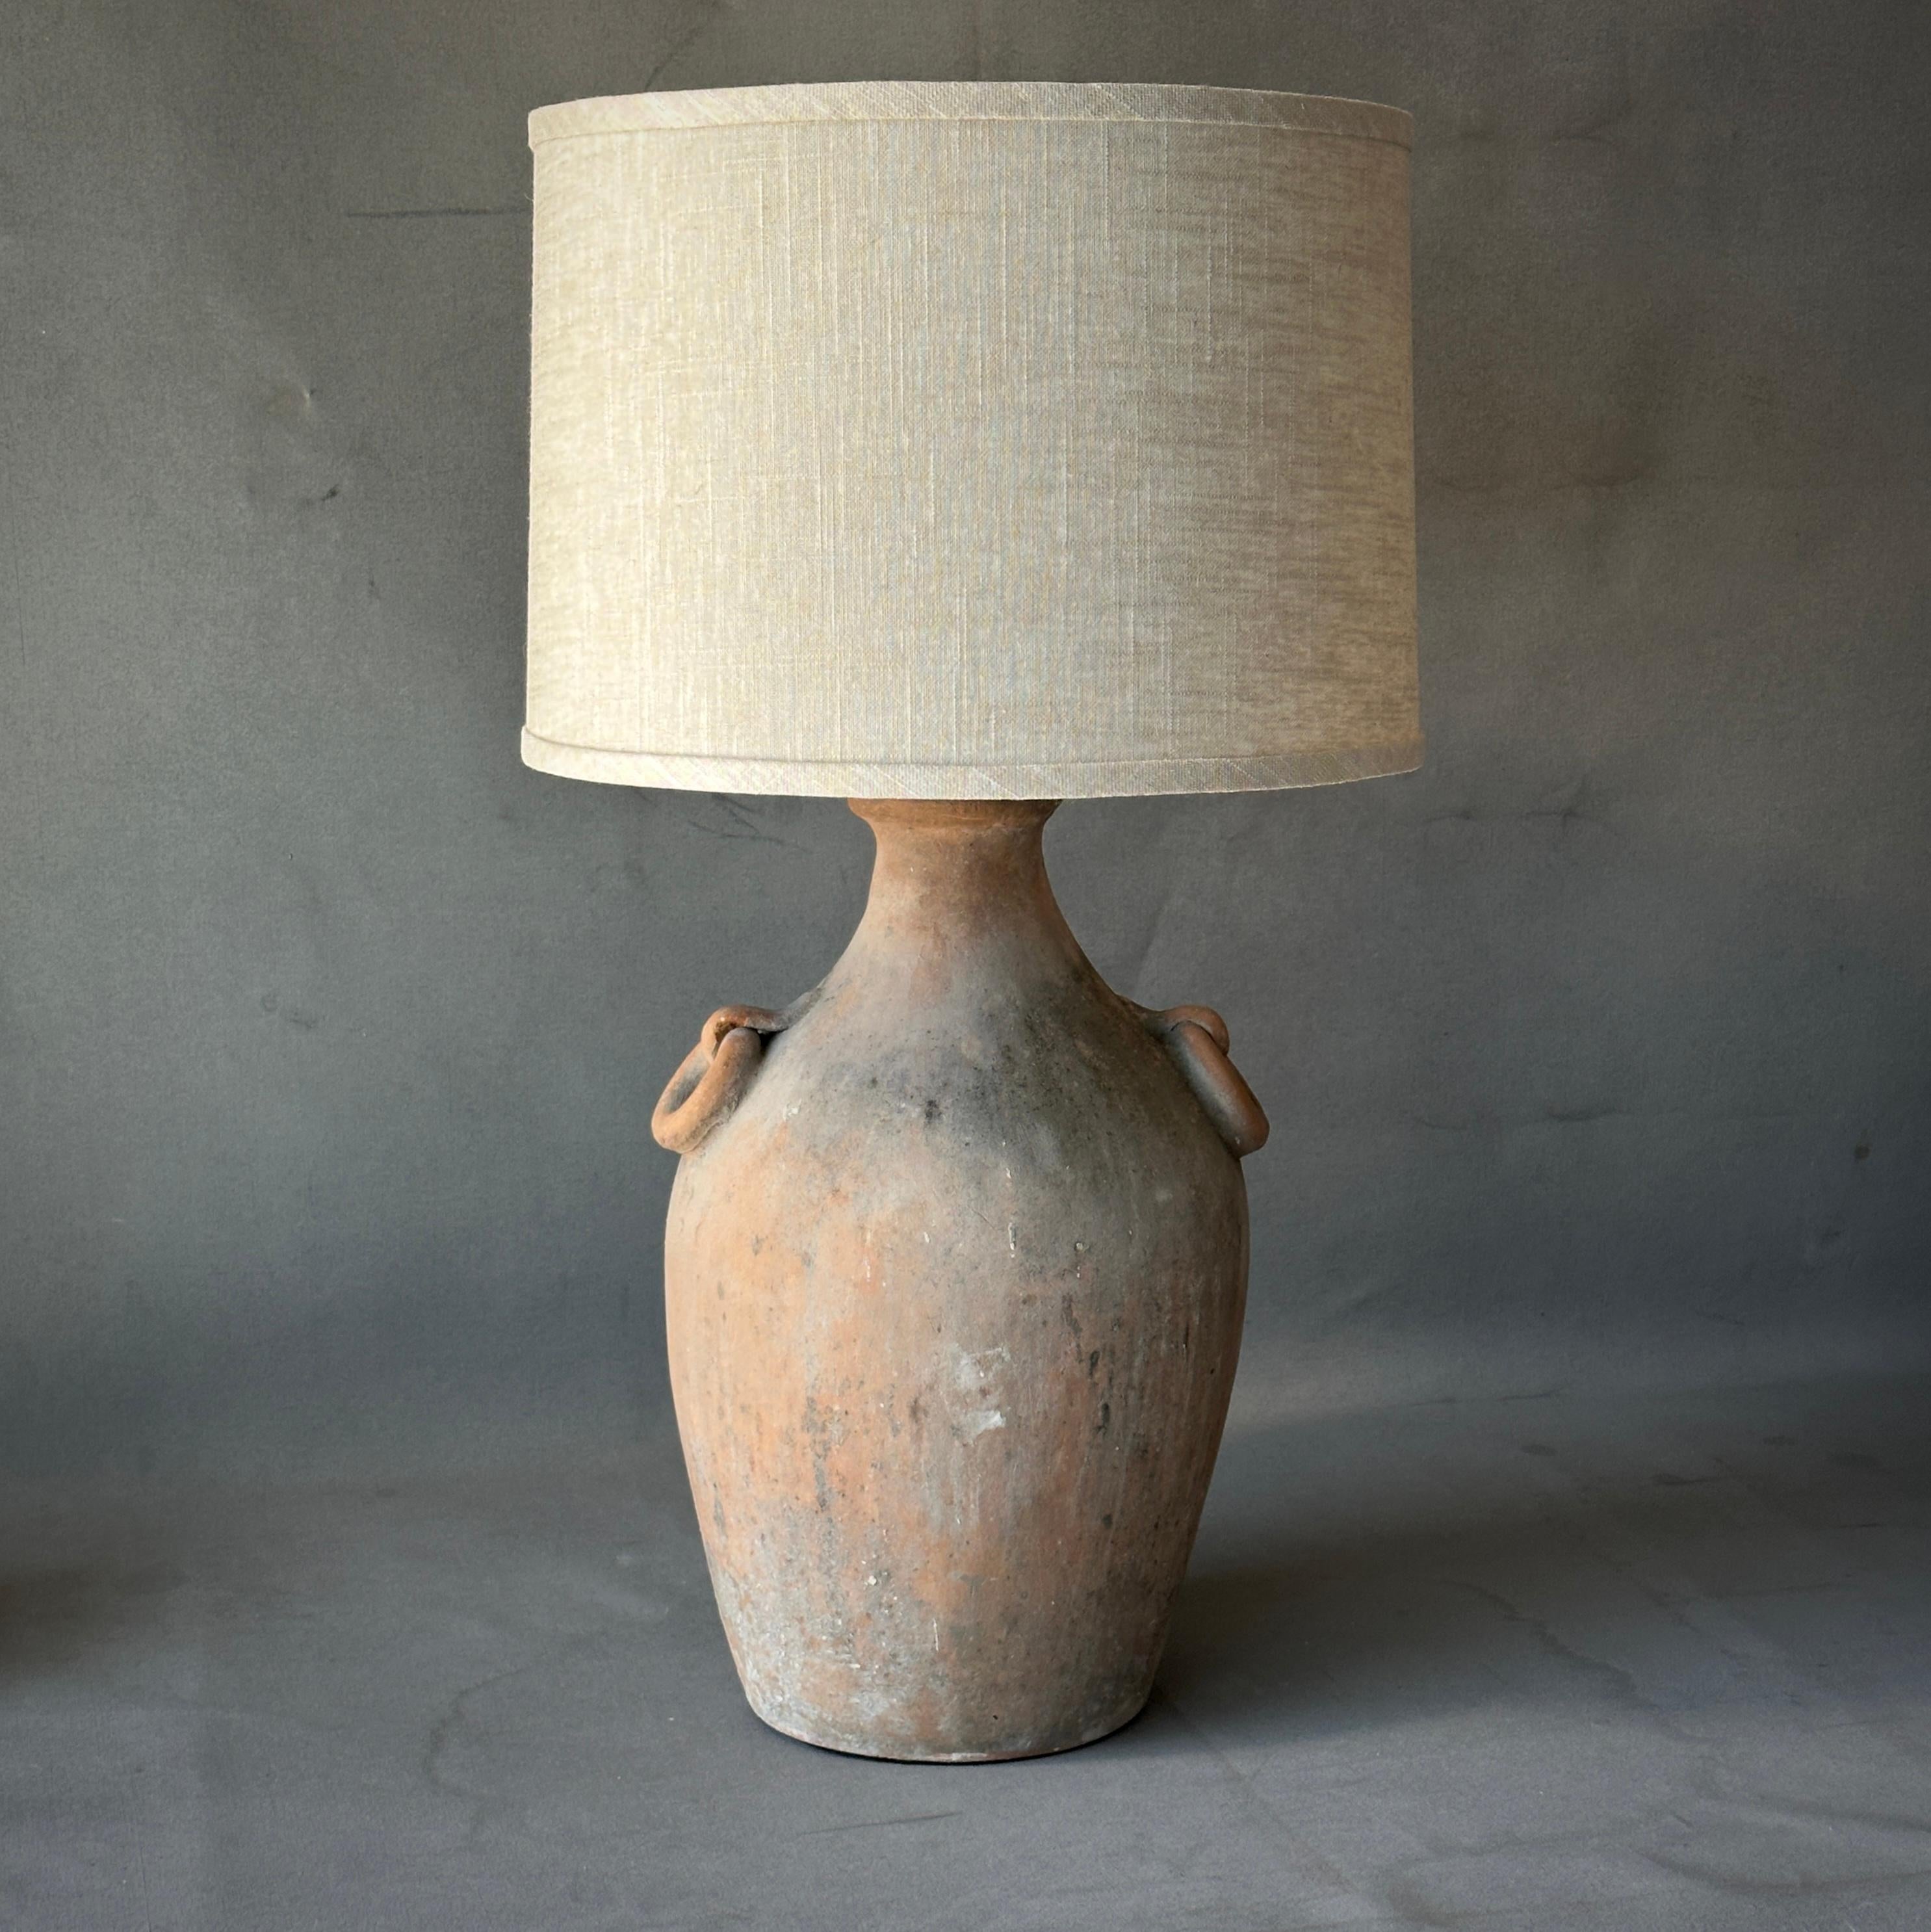 Decorative Terracotta Vessel as Lamp In Good Condition For Sale In Los Angeles, CA